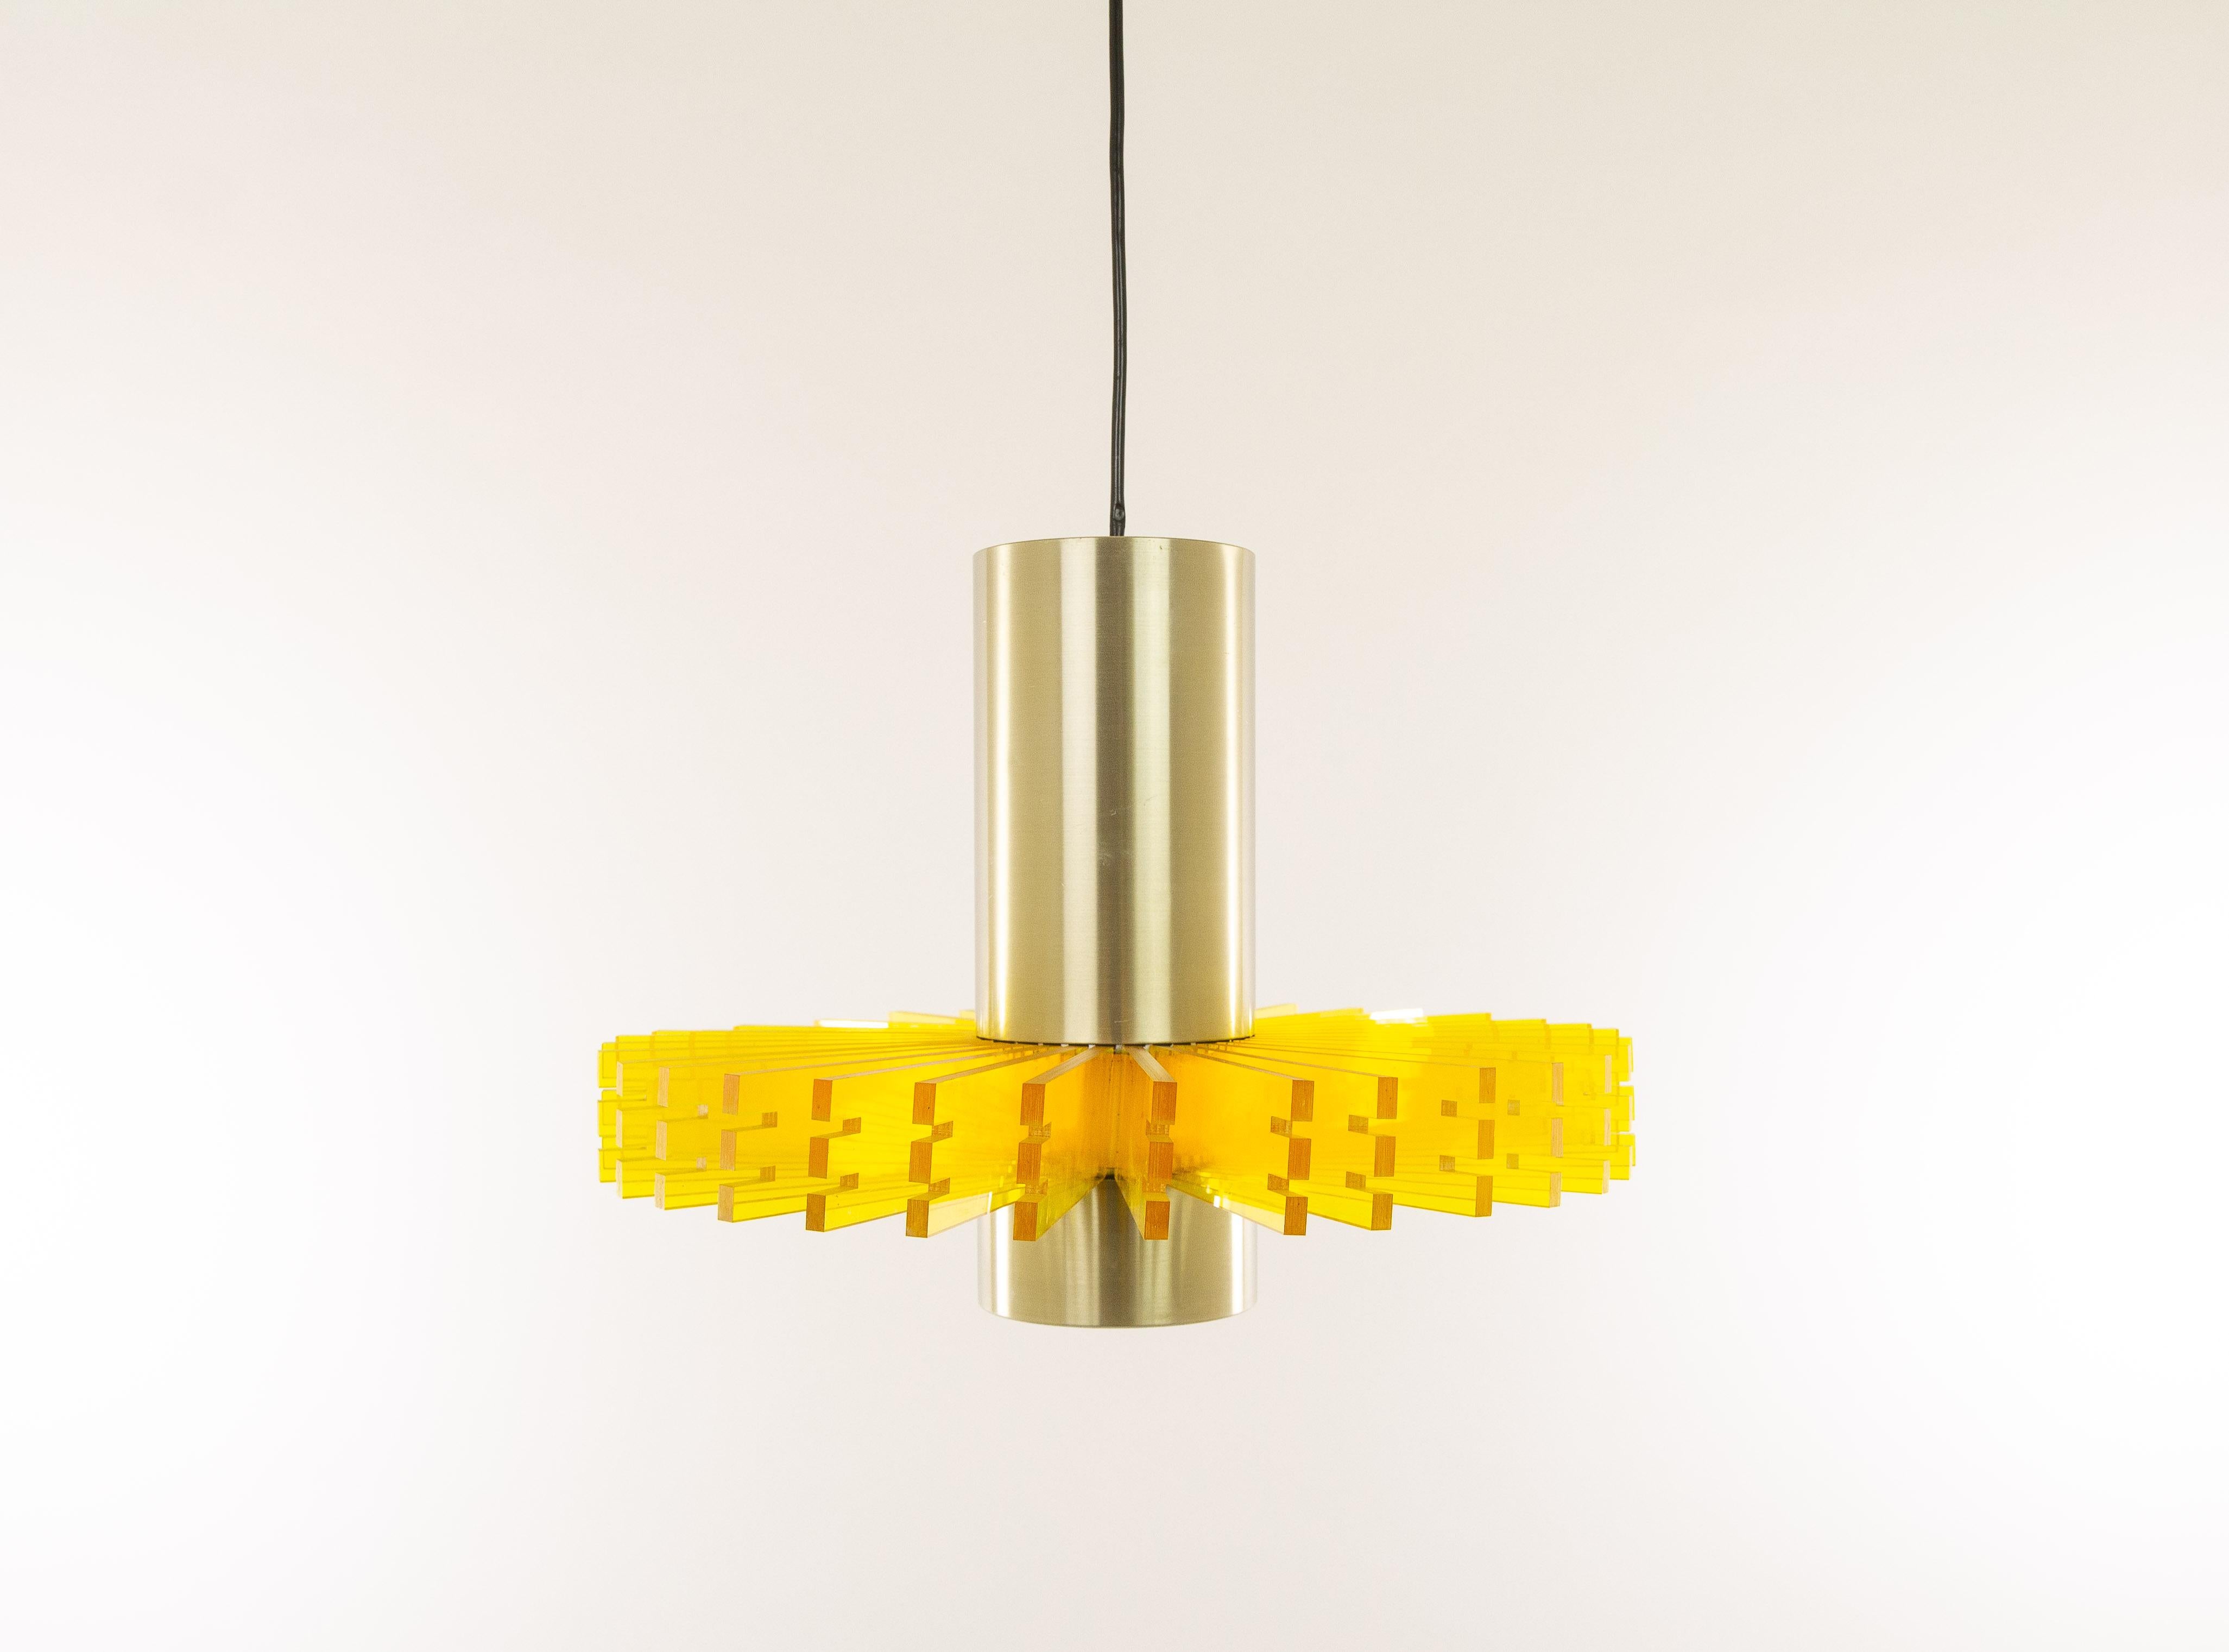 Yellow 'Priest Collar' Pendant by Claus Bolby for Cebo Industri, 1960s (Aluminium)